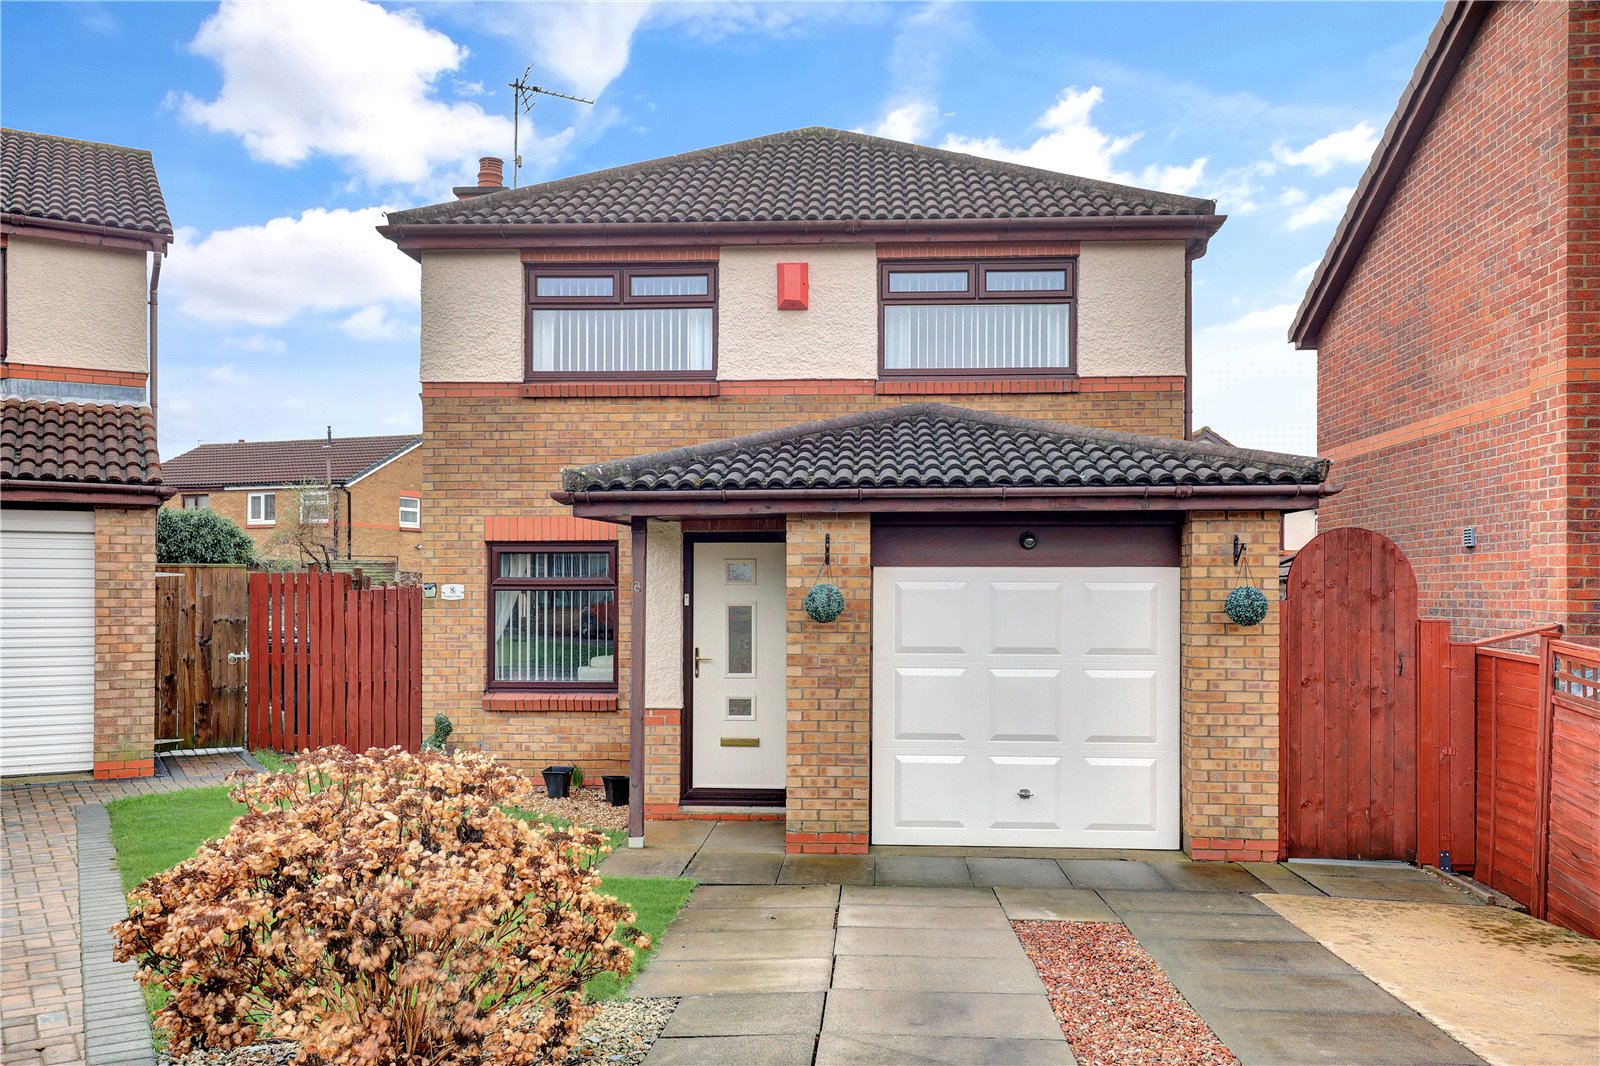 3 bed house for sale in Cooks Court, Ormesby 1